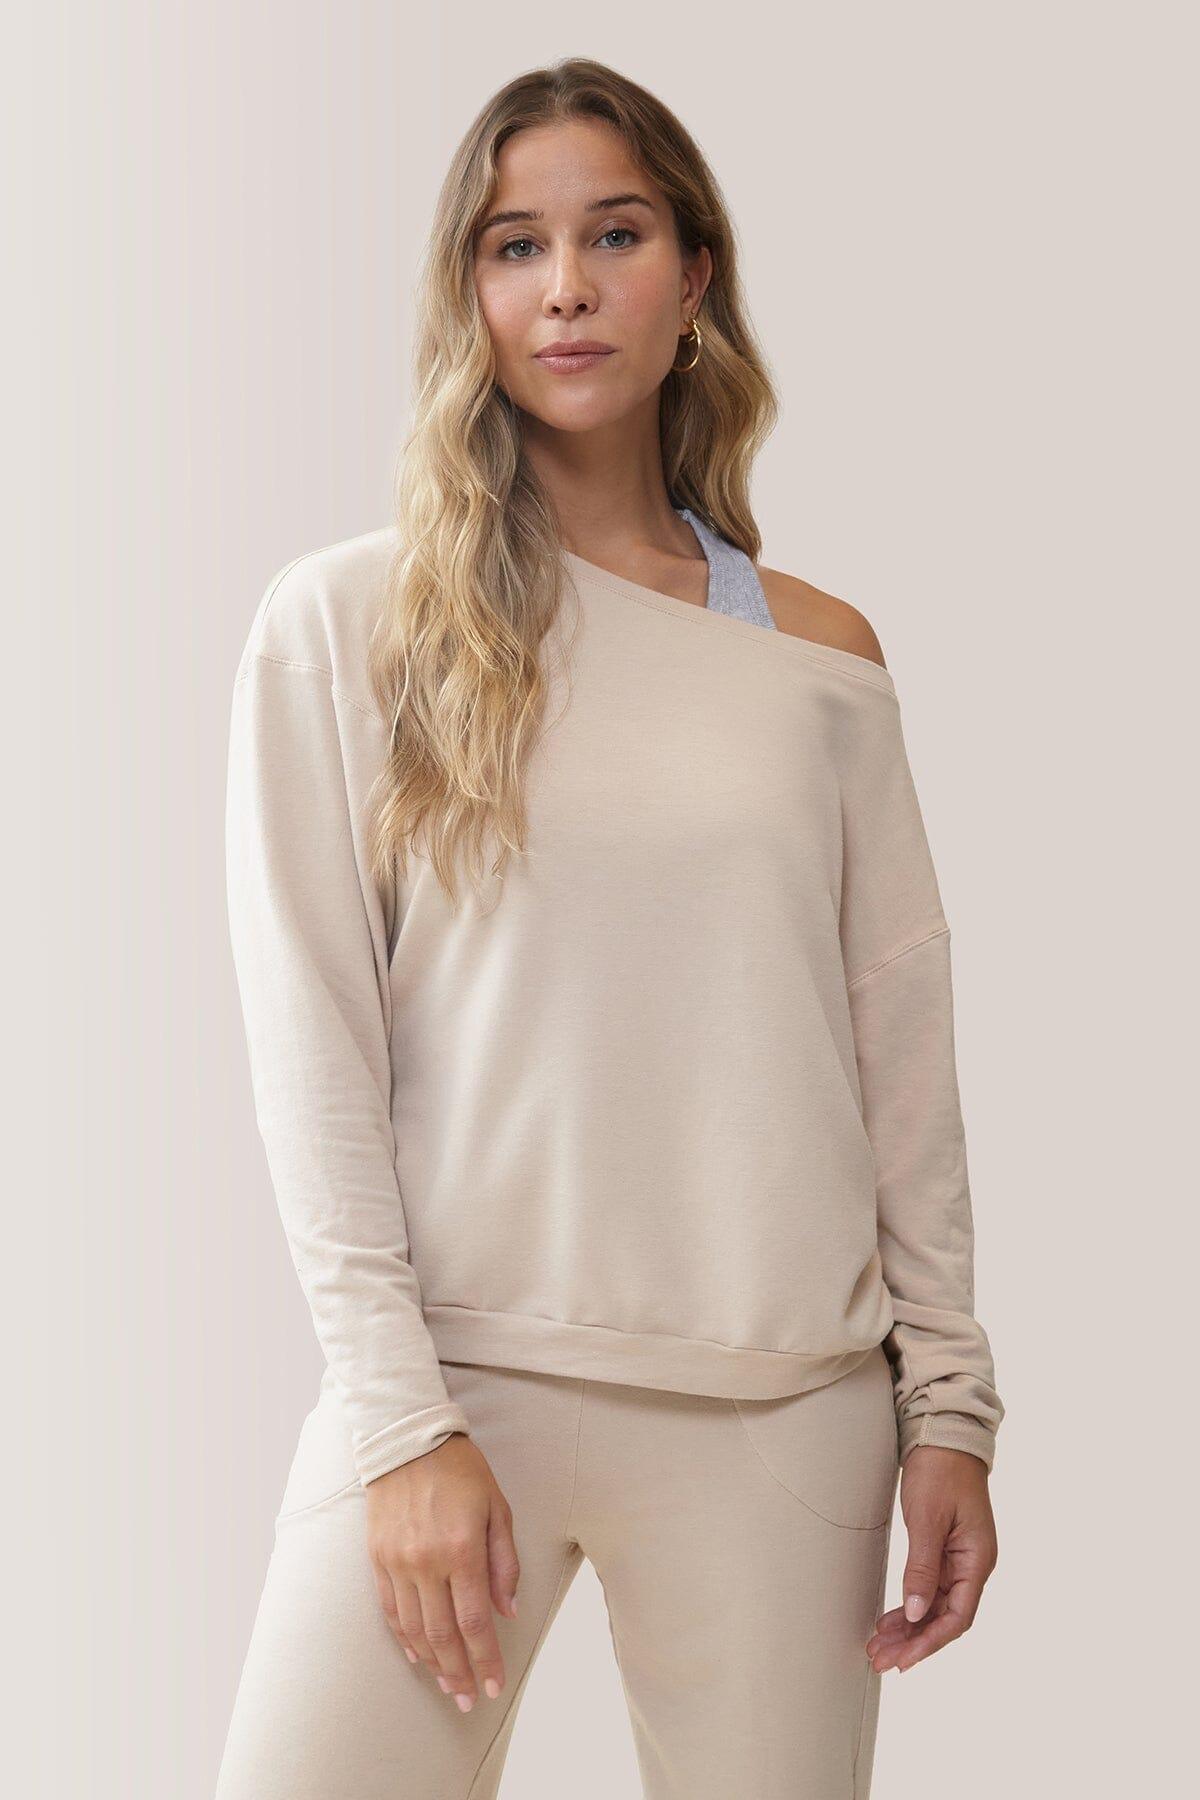 Femme qui porte le chandail Flashdance de Rose Boreal./ Women wearing the Flashdance pullover from Rose Boreal. - Sand Beige / Beige Sable